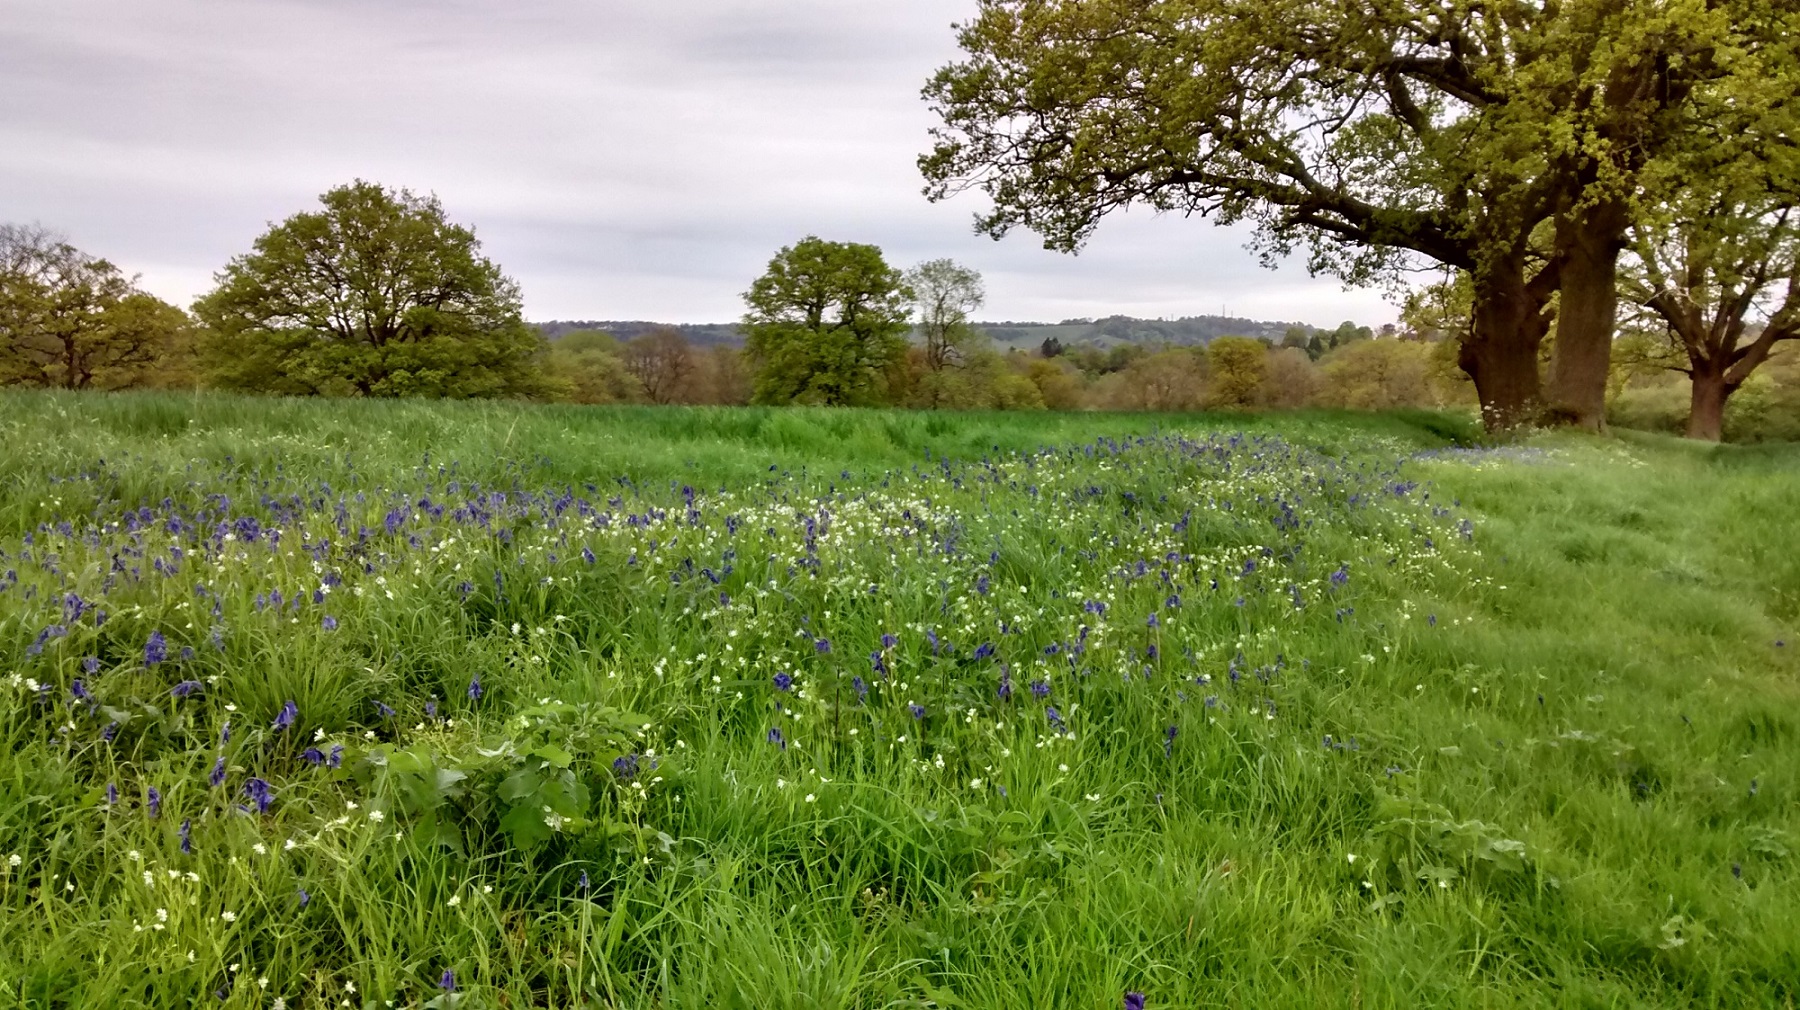 Bluebells and whitebells grow on a gentle grassy ridge amongst open fields on a cloudy spring day.